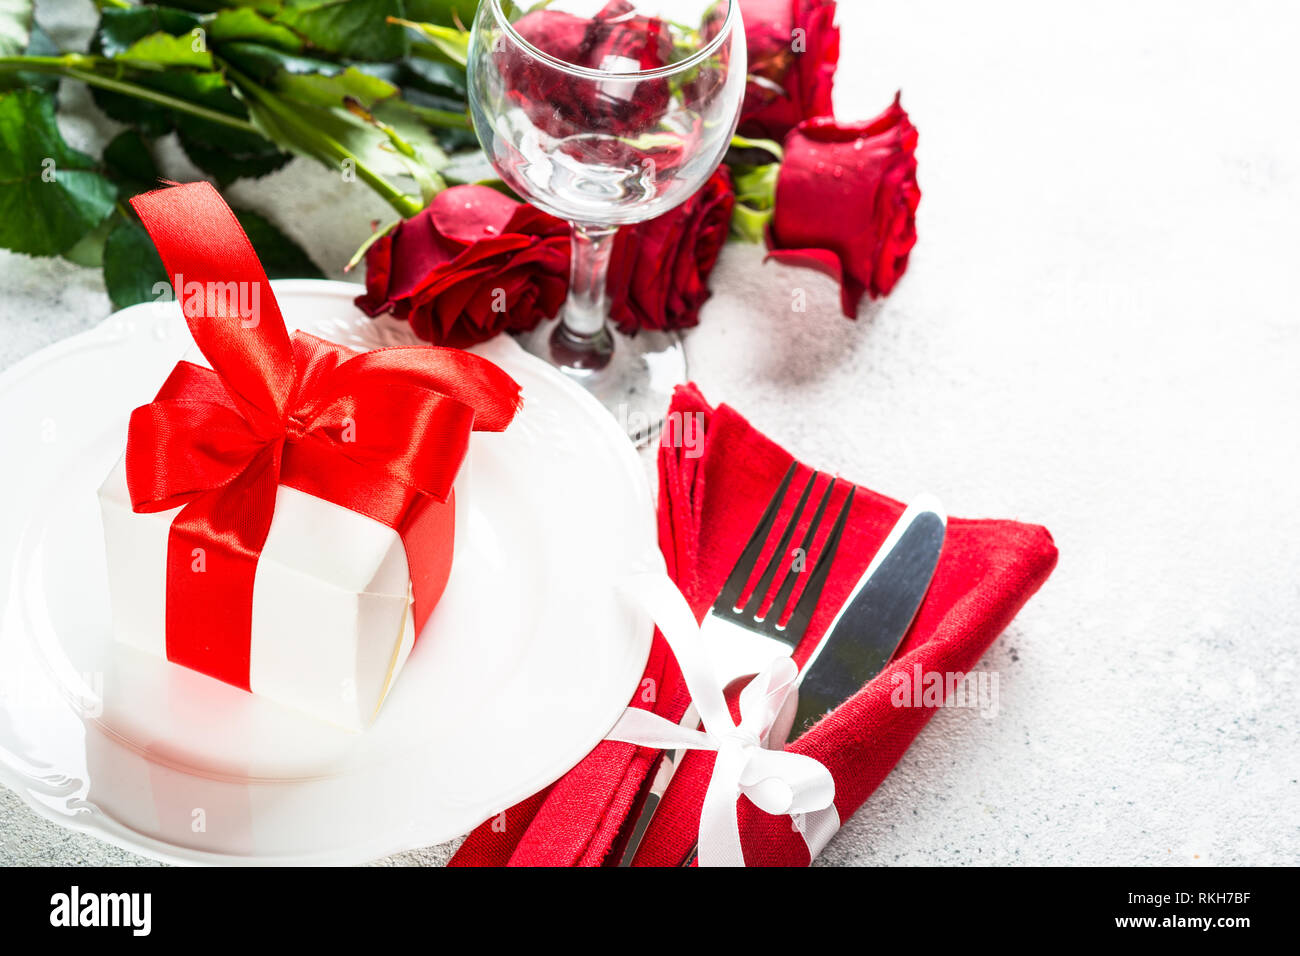 Holiday table setting with plate, roses and present. Stock Photo